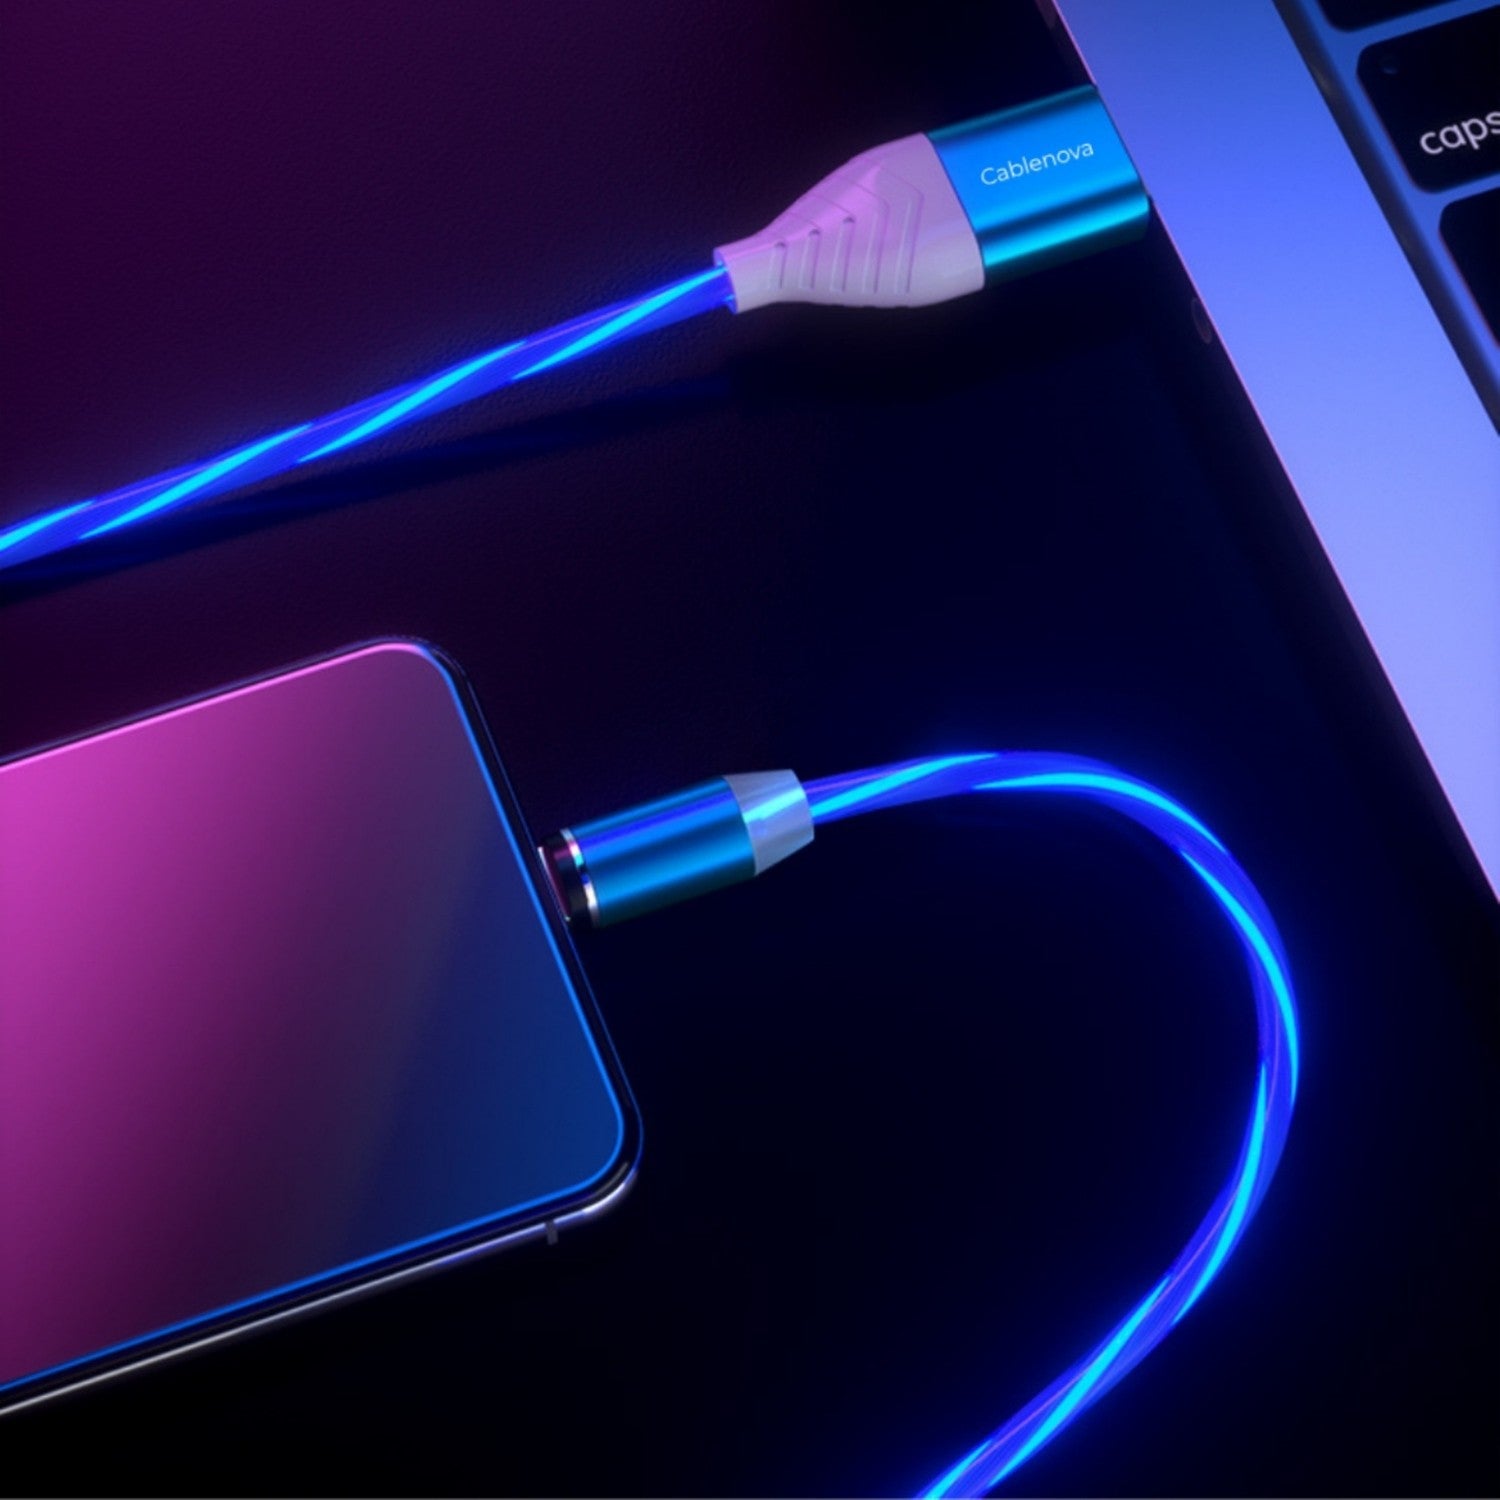 Blue Cablenova Magnetic LED Charging Cable